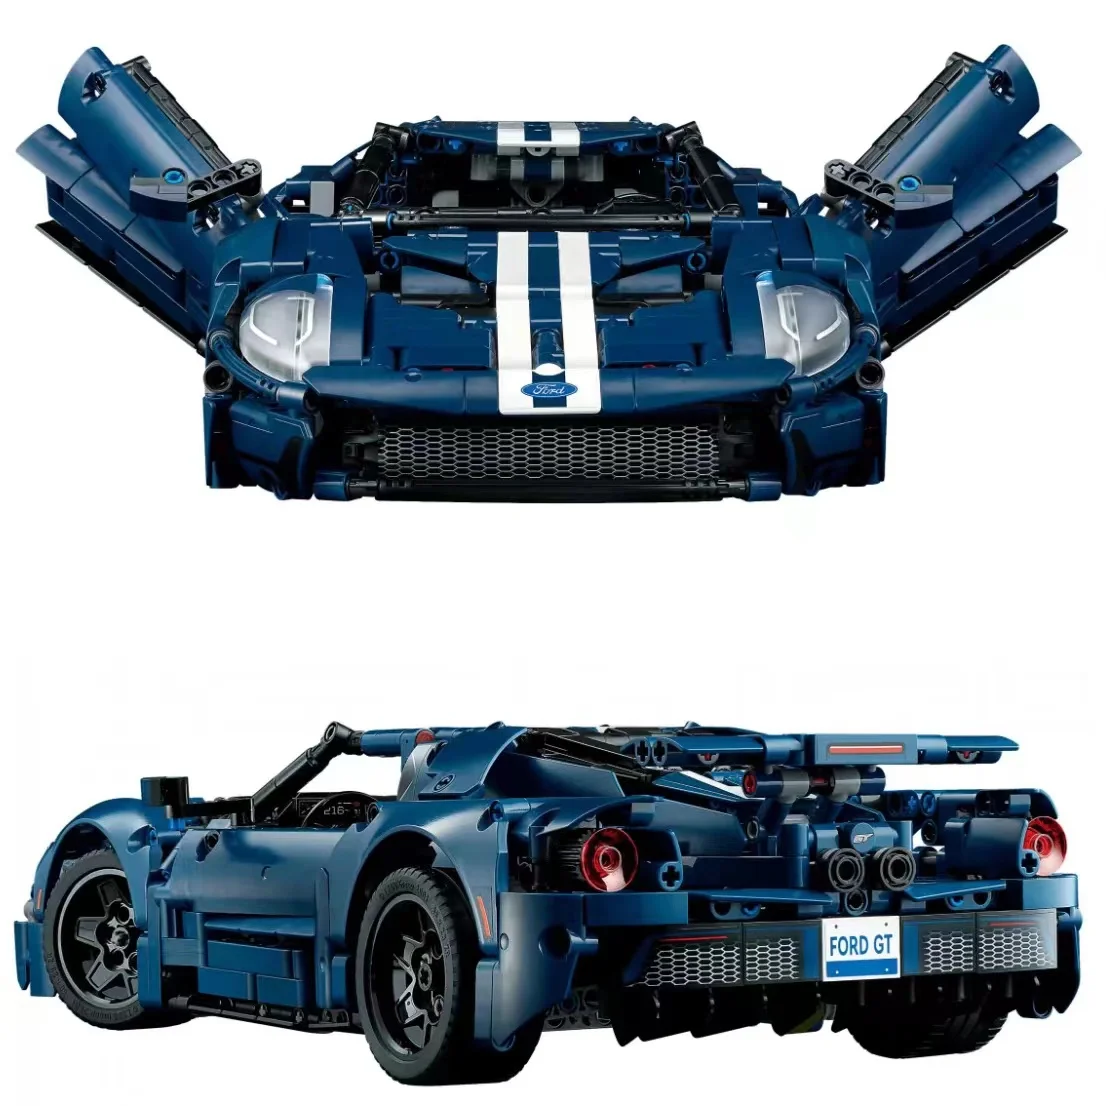 

In stock Ford GT 42154 With lighting Technology Car Model building block 1:12 Technical Car building block toy birthday gift